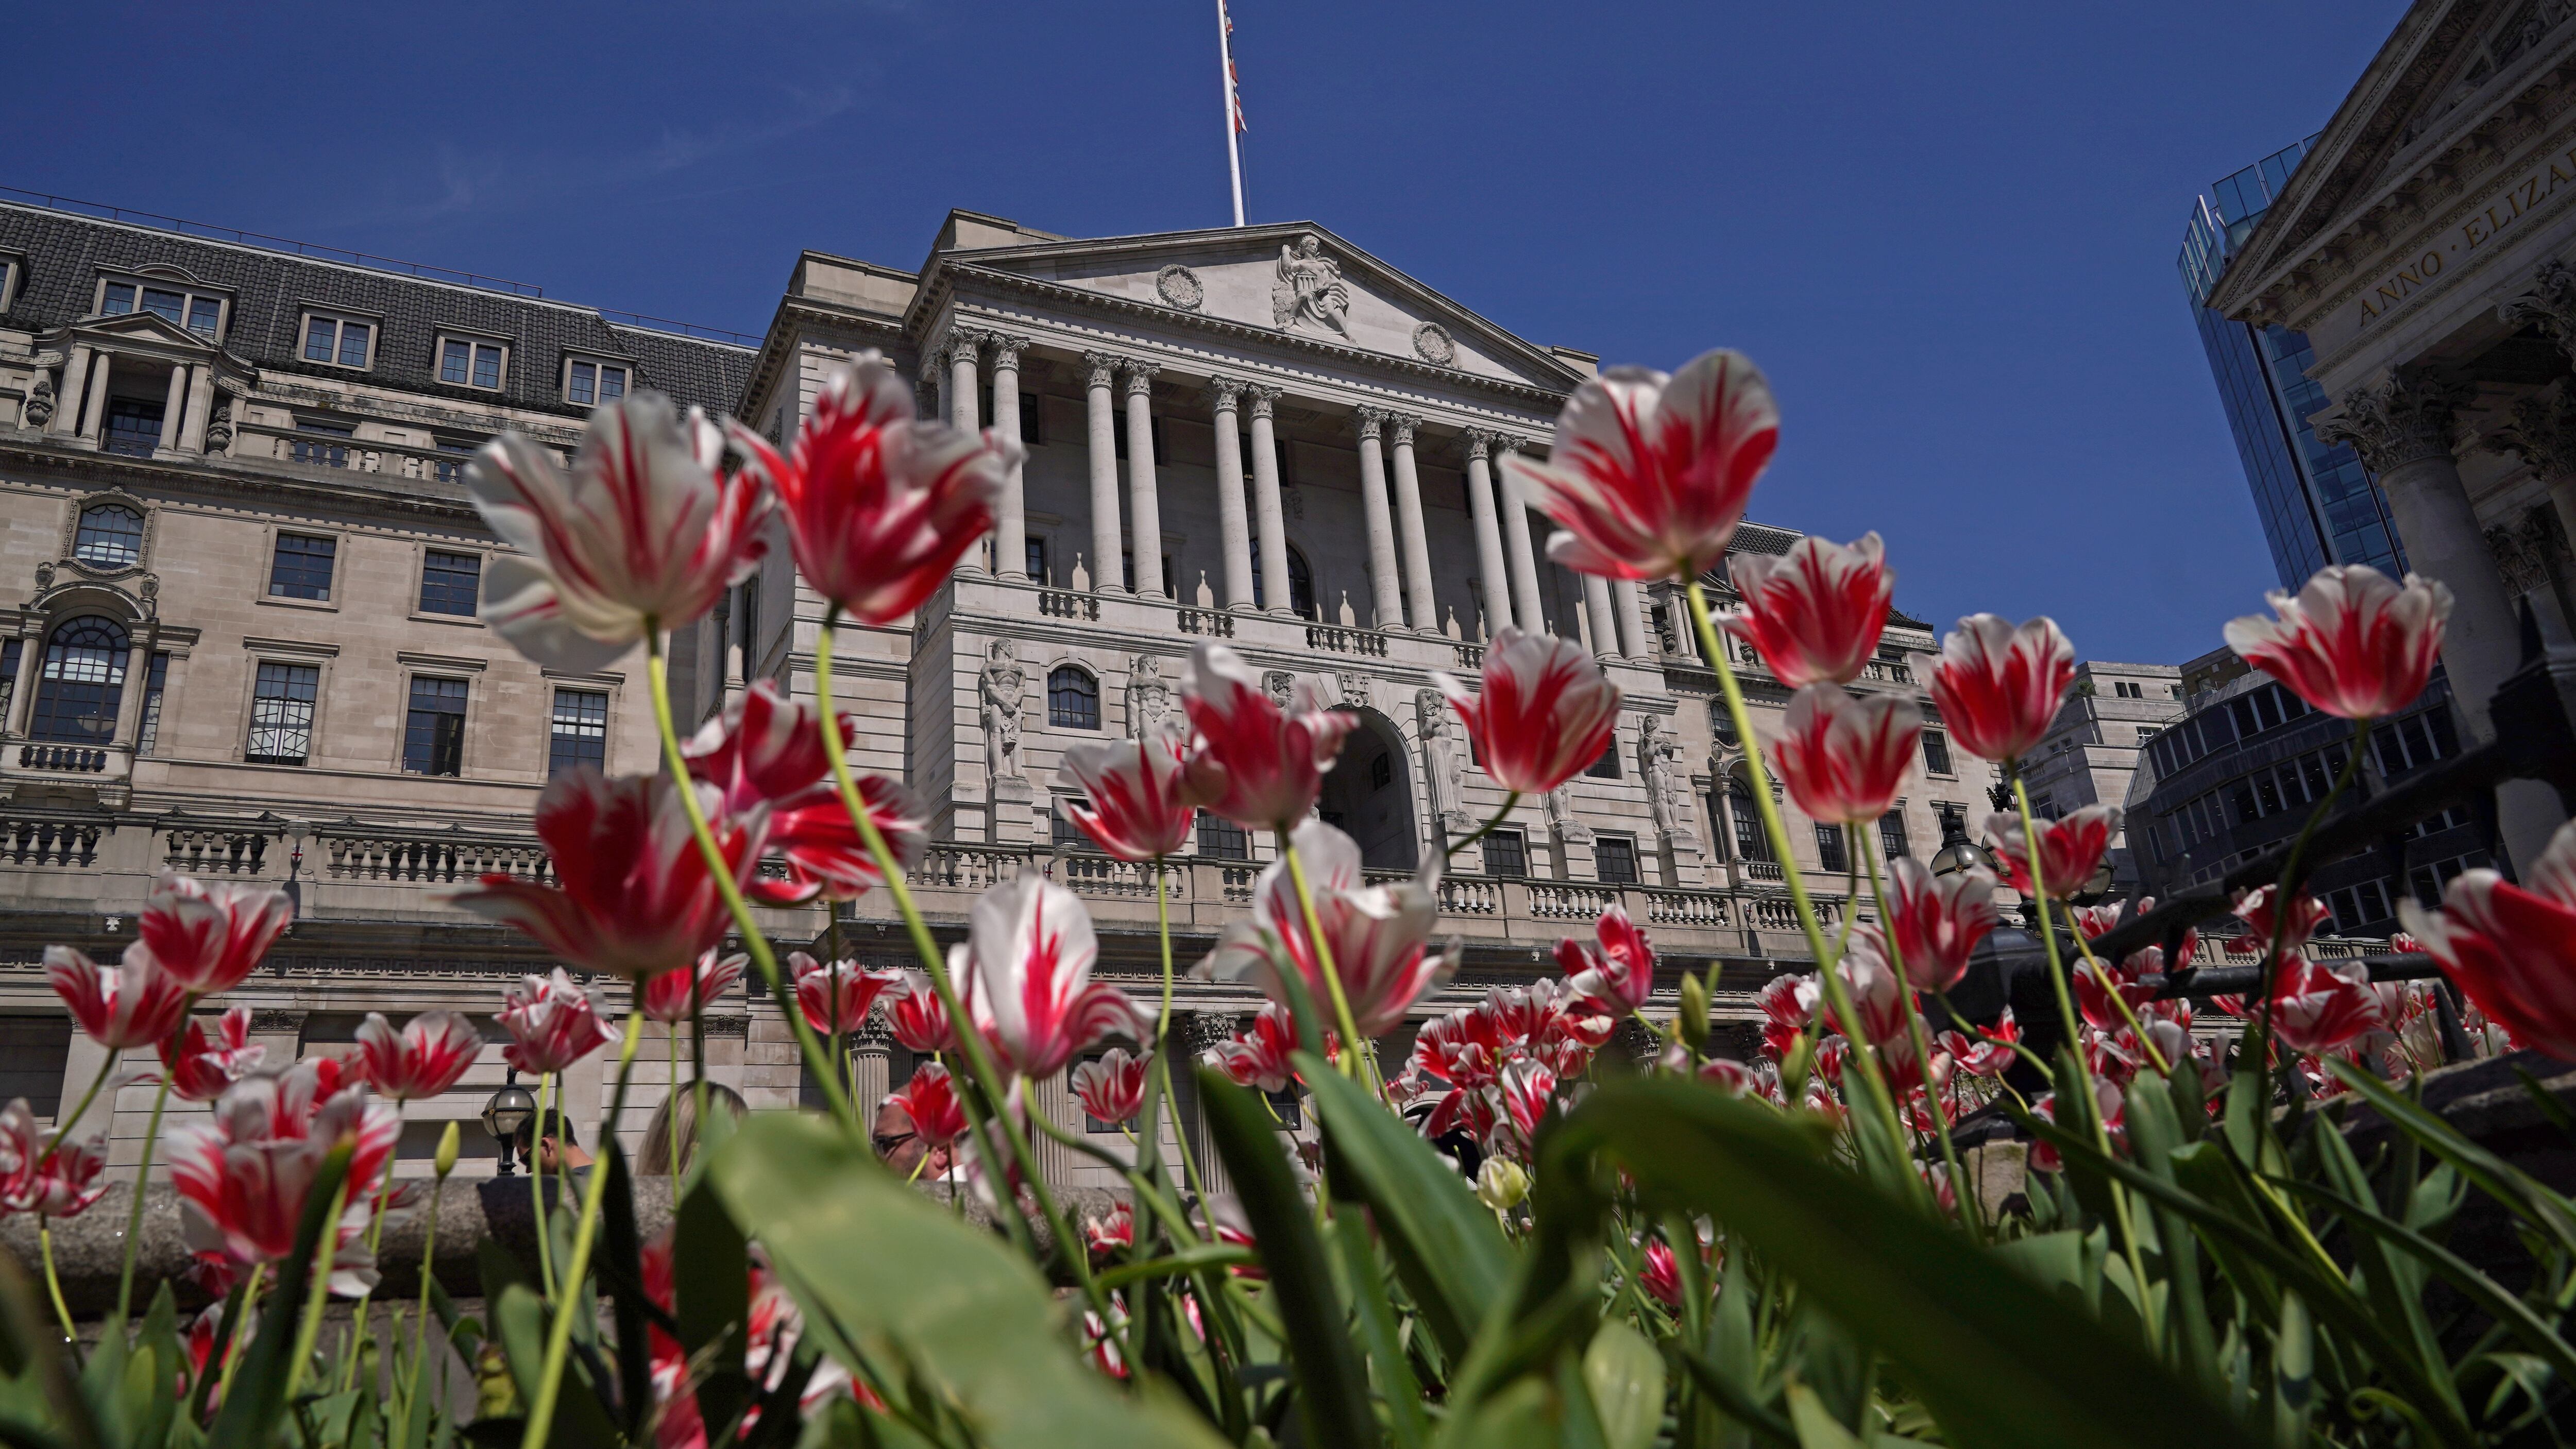 The Bank of England’s top economist has boosted hopes of lower borrowing costs after saying it is ‘not unreasonable to expect the Bank to consider cutting interest rates over the summer